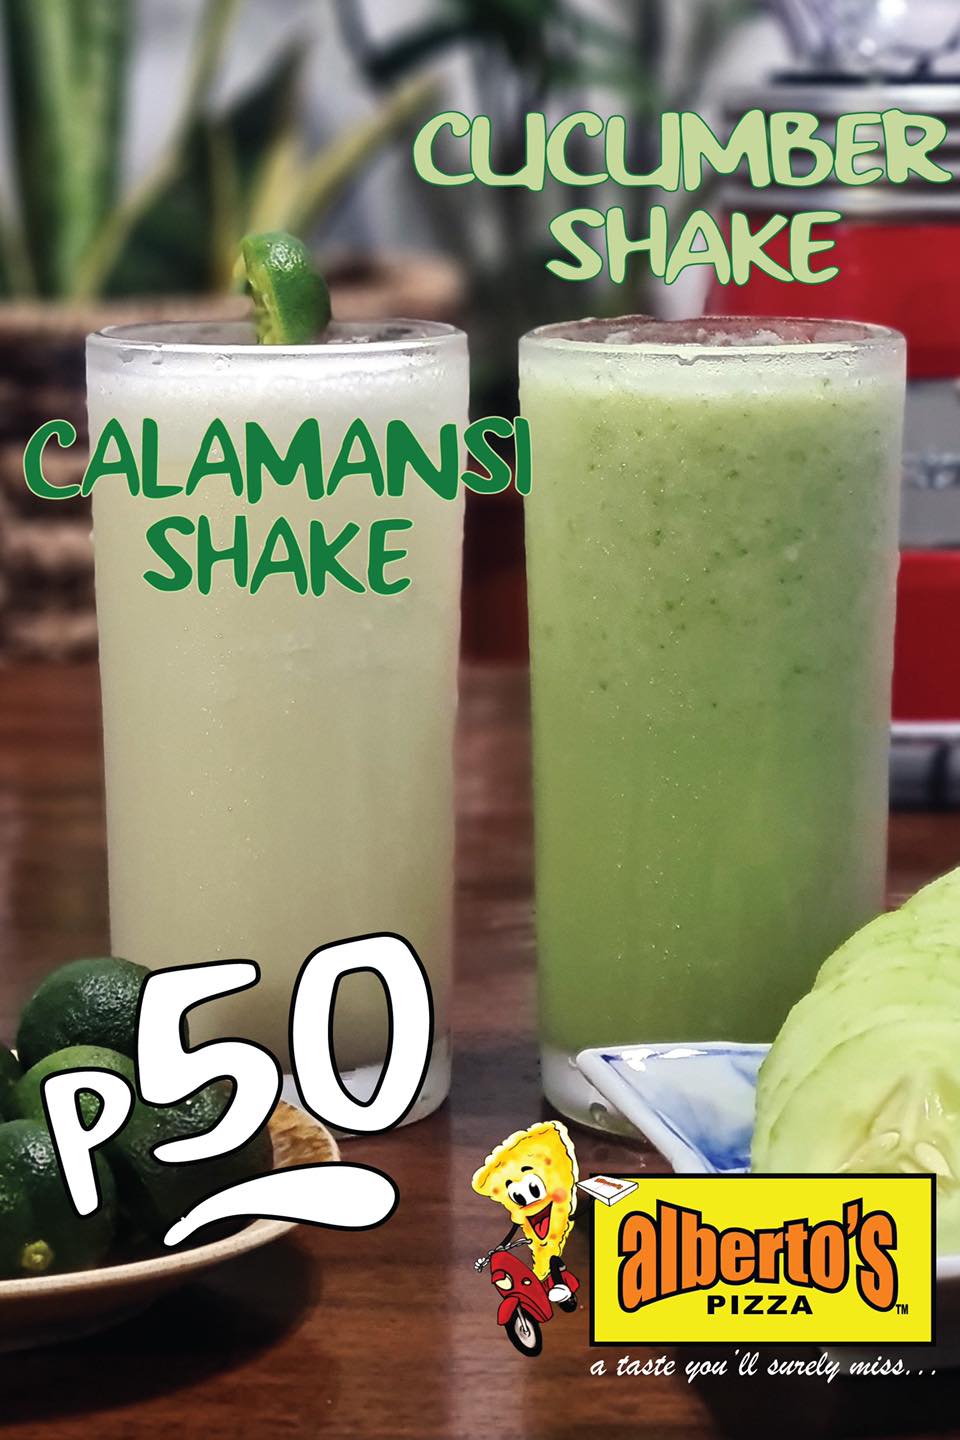 alberto's pizza 2 shakes in a glass calamansi and cucumber shake